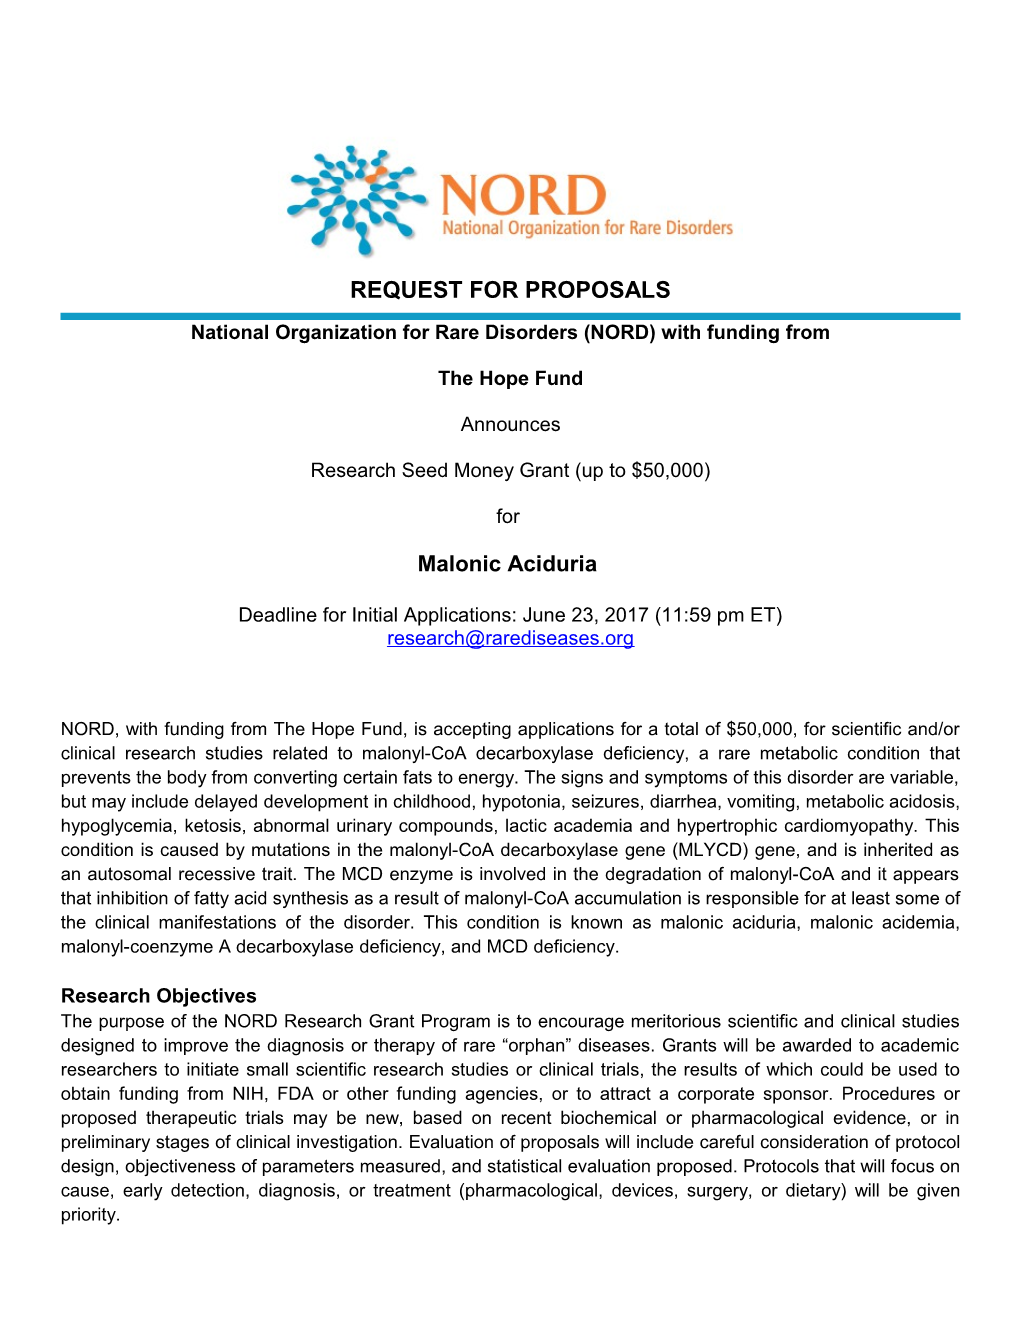 National Organization for Rare Disorders (NORD) with Funding From